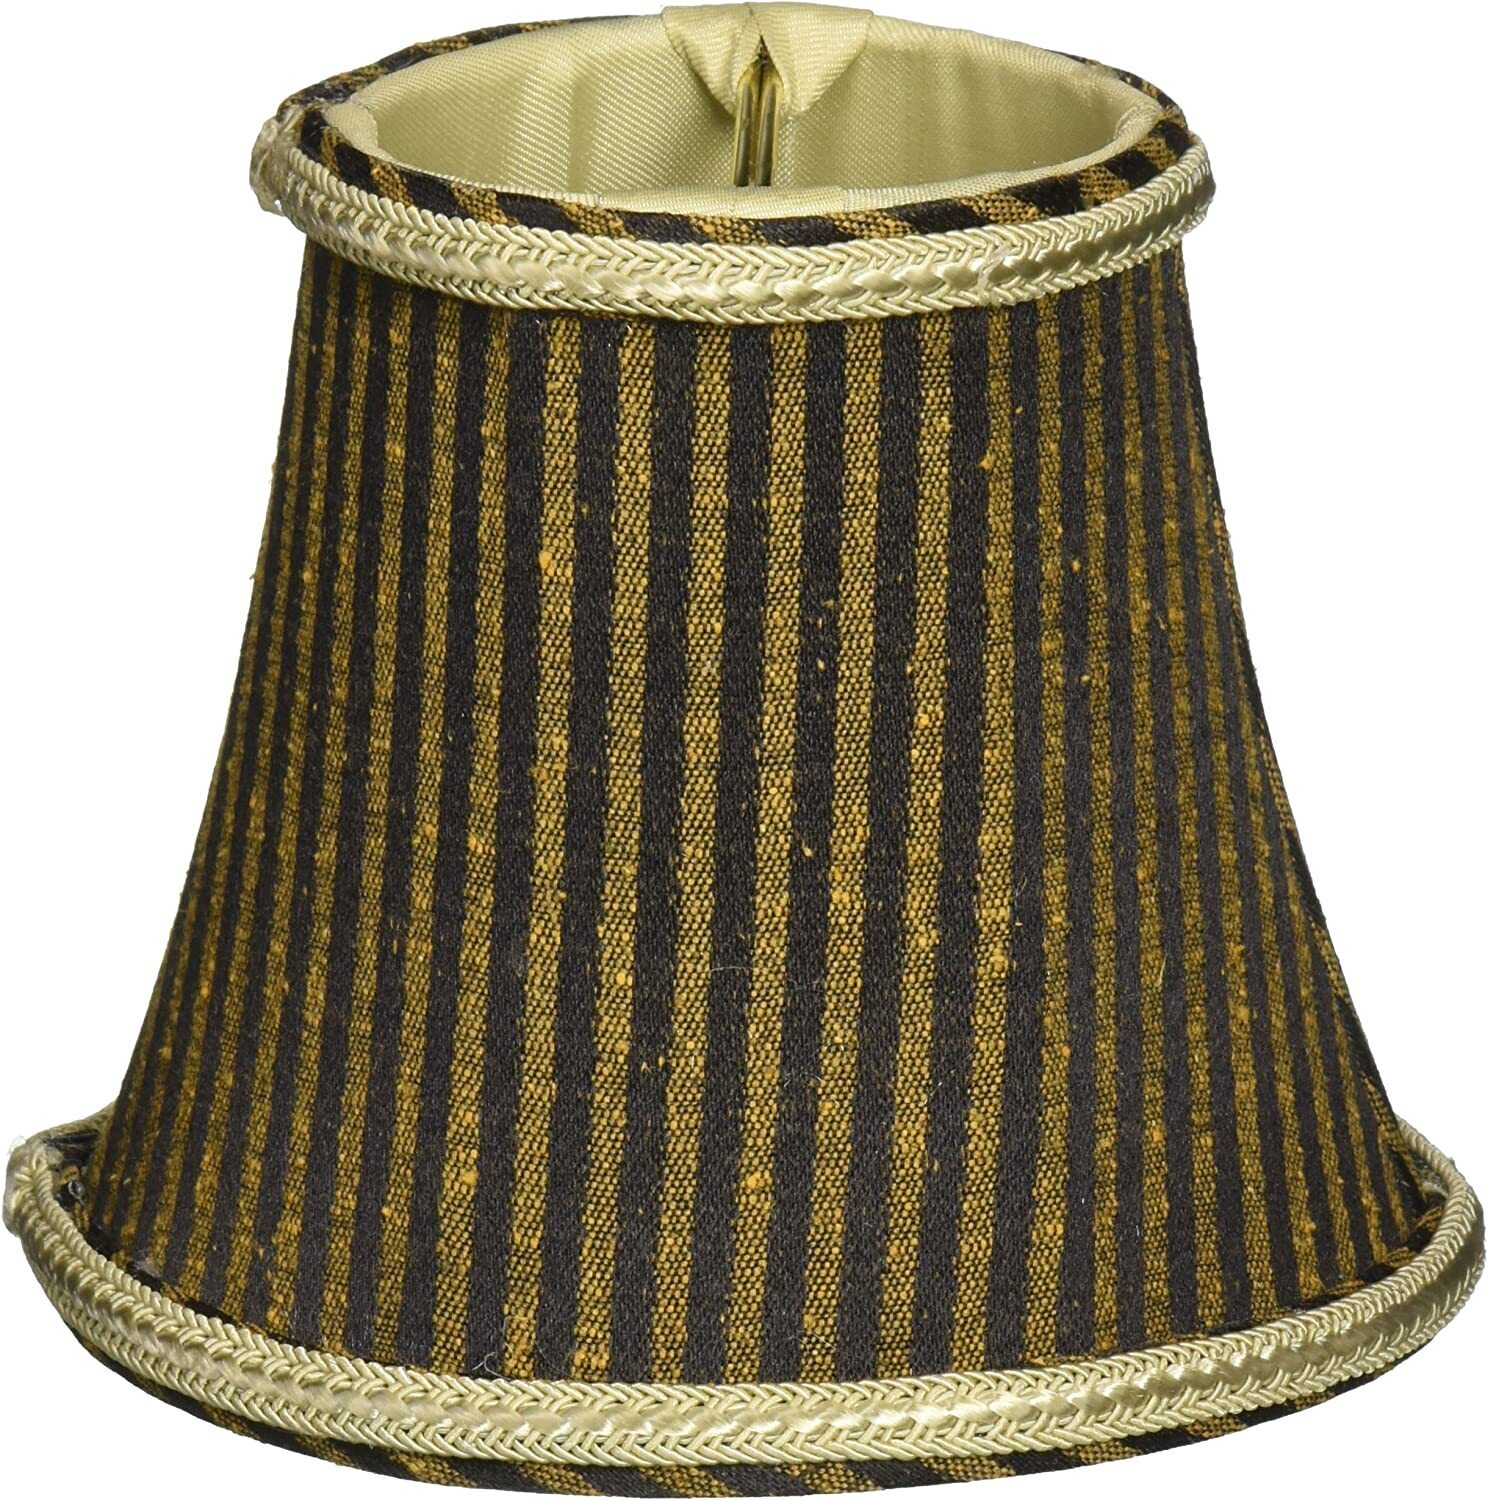 Antique Inspired Glamorous Striped Lamp Shade